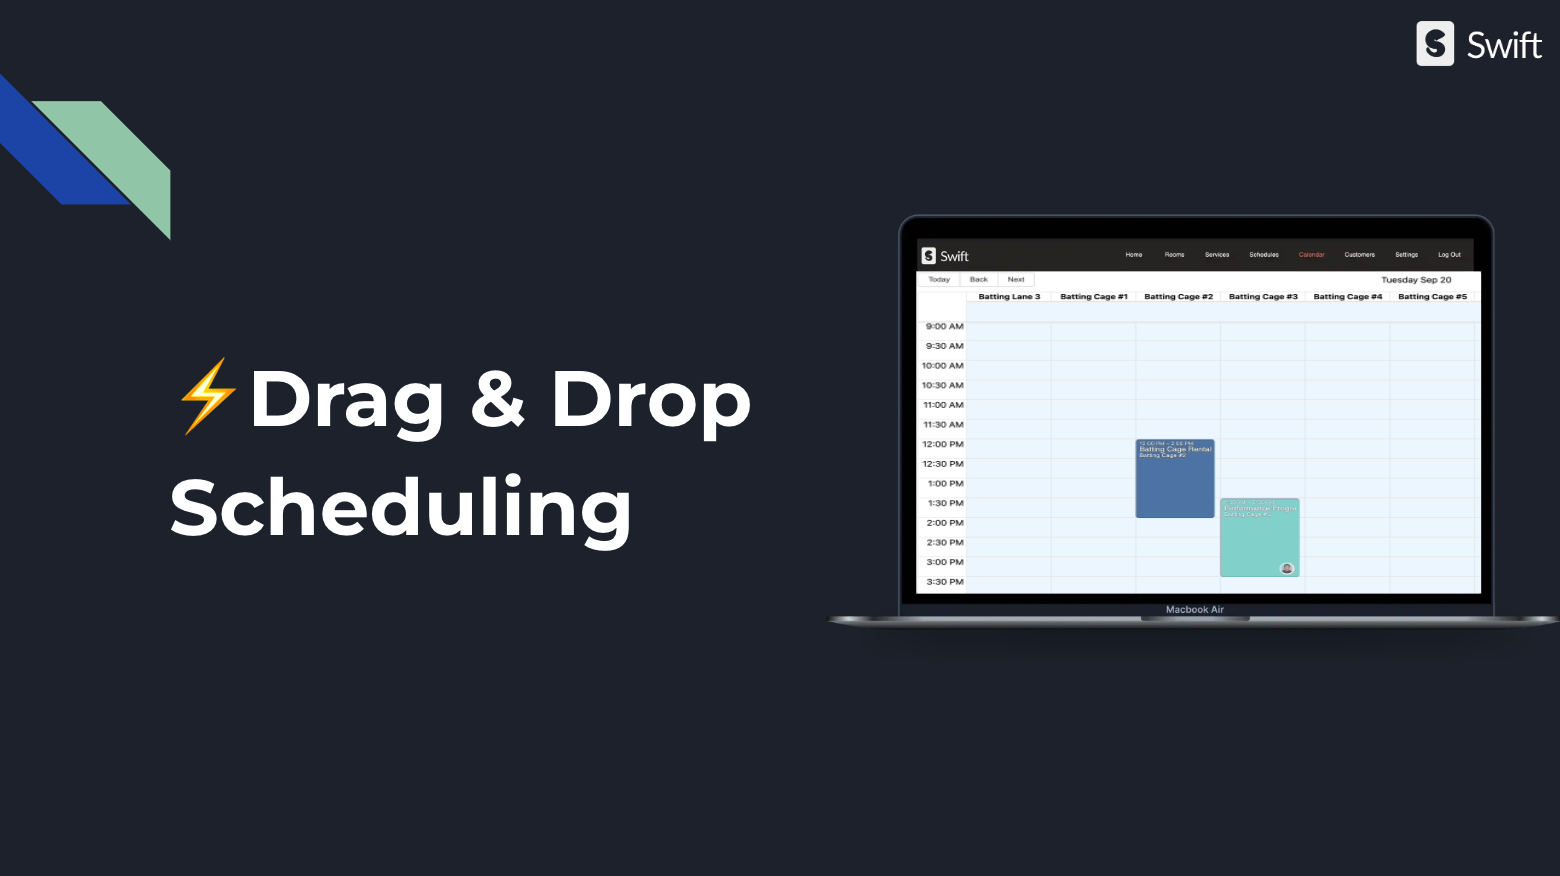 Make the life of your front-desk staff easier with drag-and-drop scheduling. You can edit it on the go as well, since it's mobile friendly